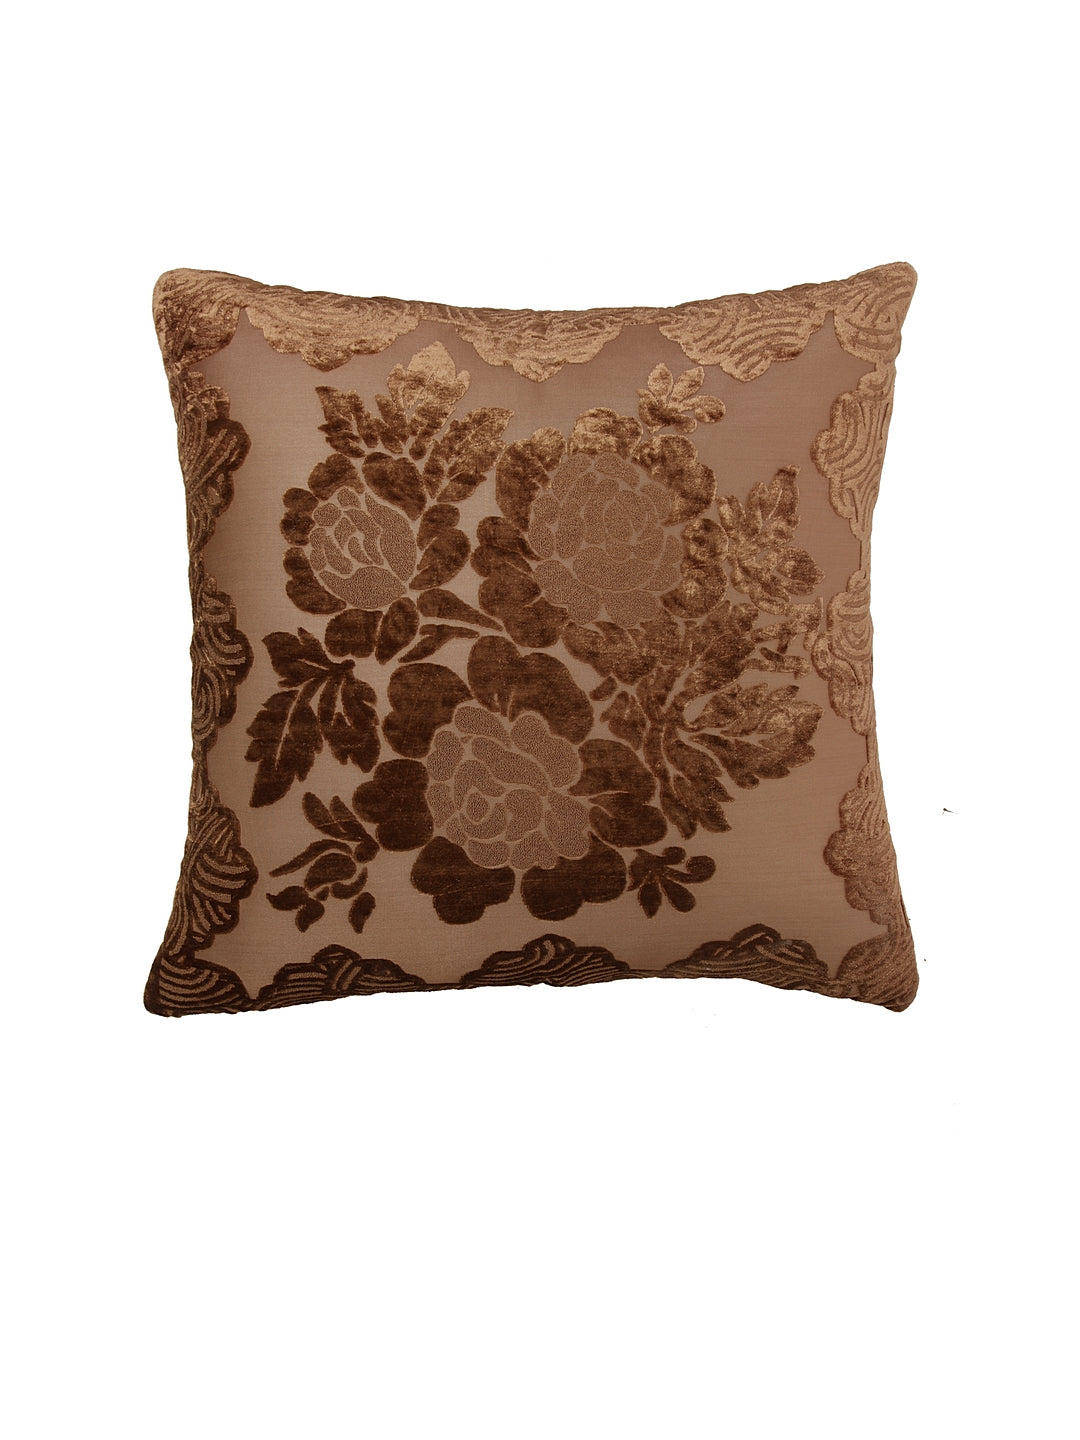 Detec™ Hosta Floral Embossed Printed Cushion Cover 24 X 24 Inches (Set of 2)